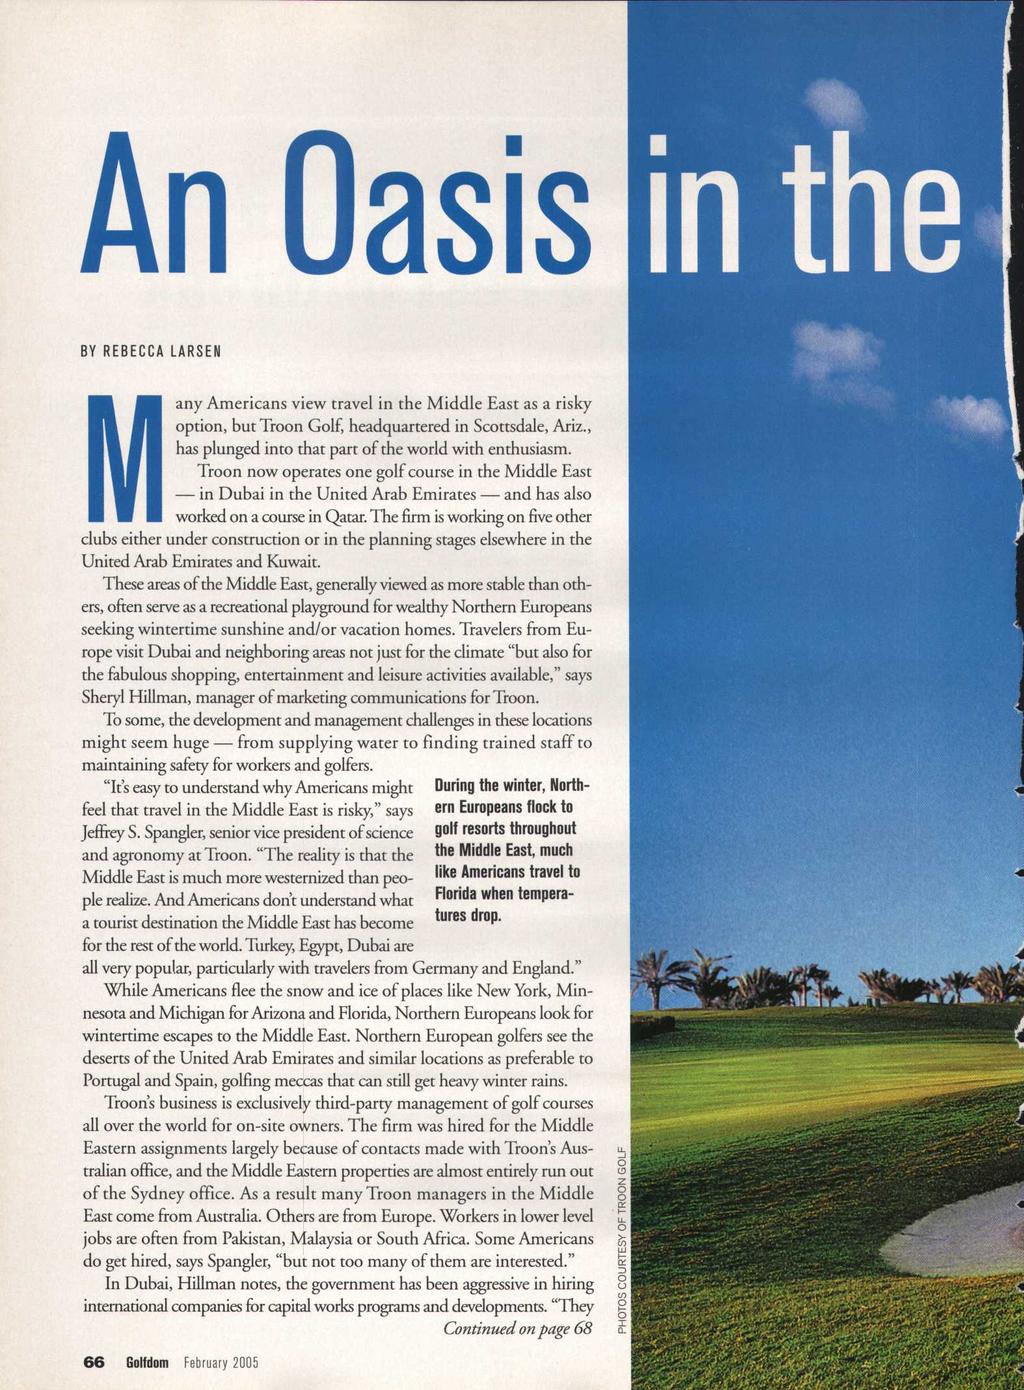 An Oasis in the BY REBECCA LARSEN Many Americans view travel in the Middle East as a risky option, but Troon Golf, headquartered in Scottsdale, Ariz.